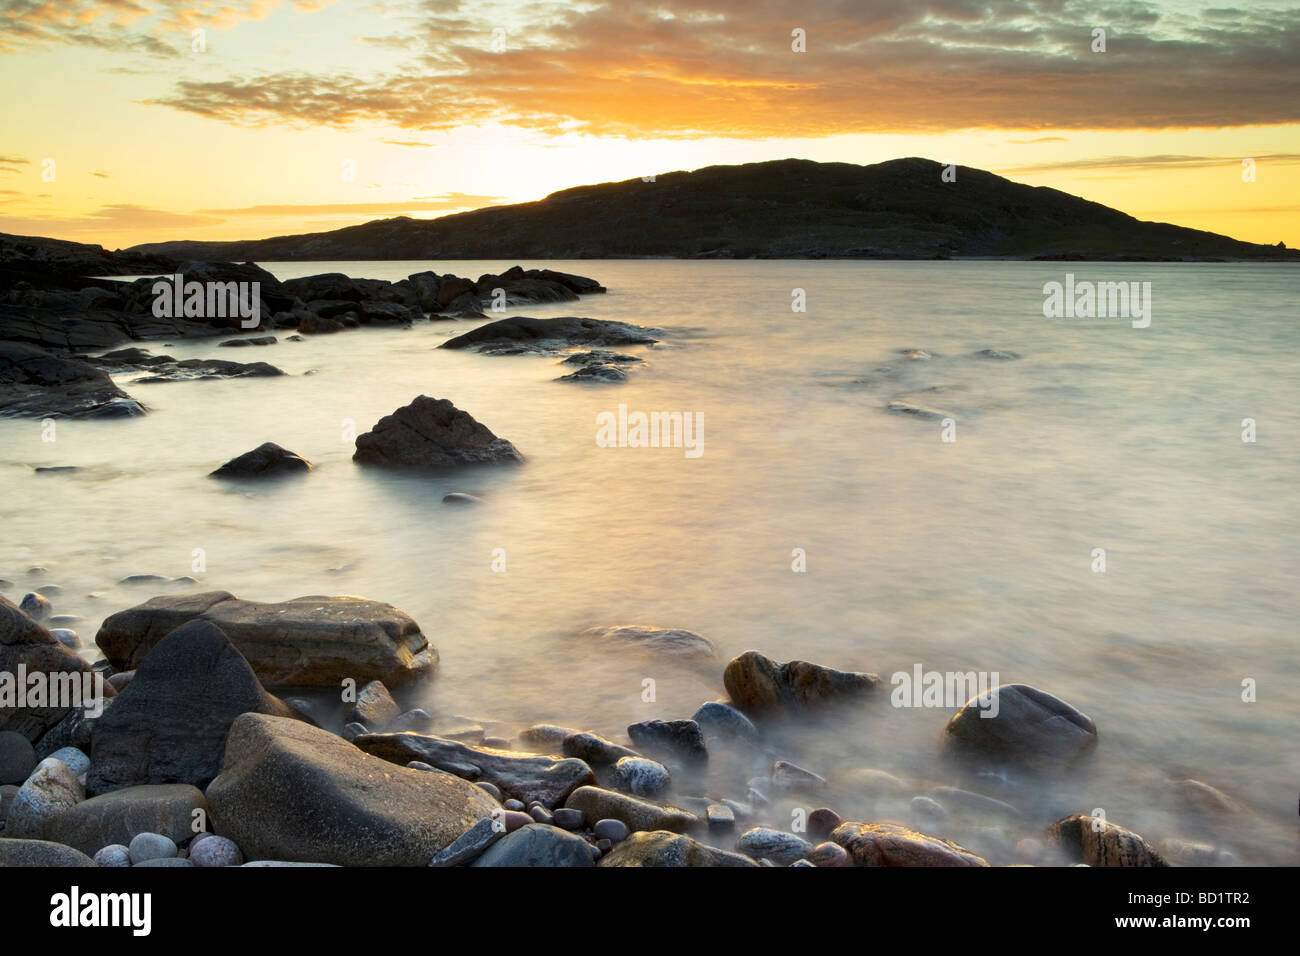 Sunset over the island of Scarp seen from the west coast of Harris, Outer Hebrides, Scotland Stock Photo